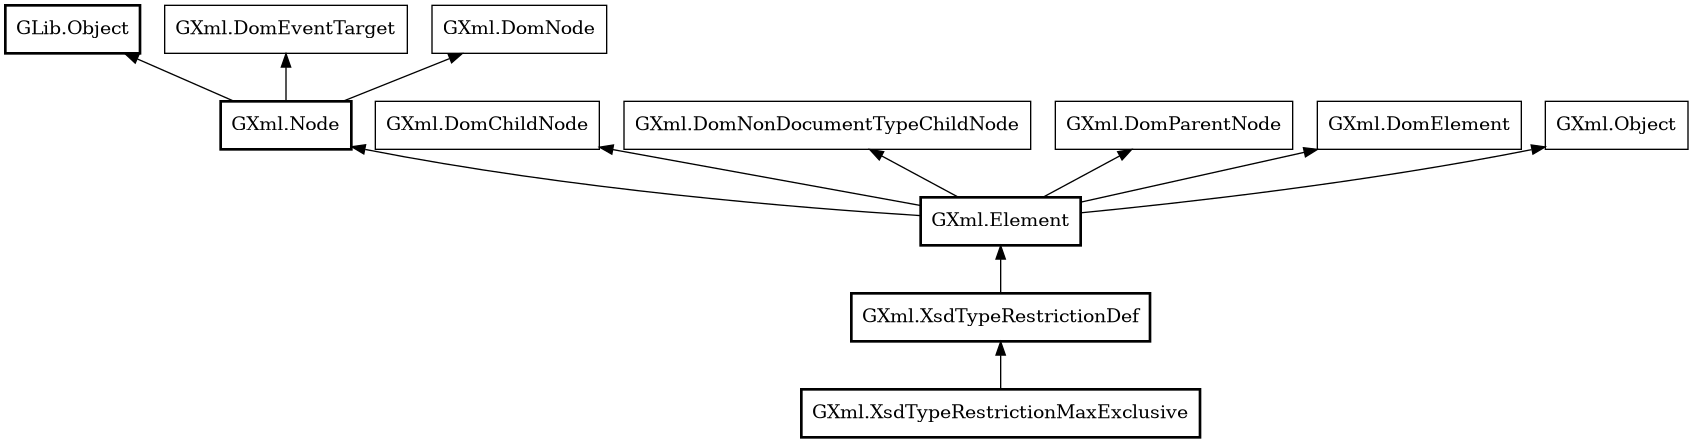 Object hierarchy for XsdTypeRestrictionMaxExclusive